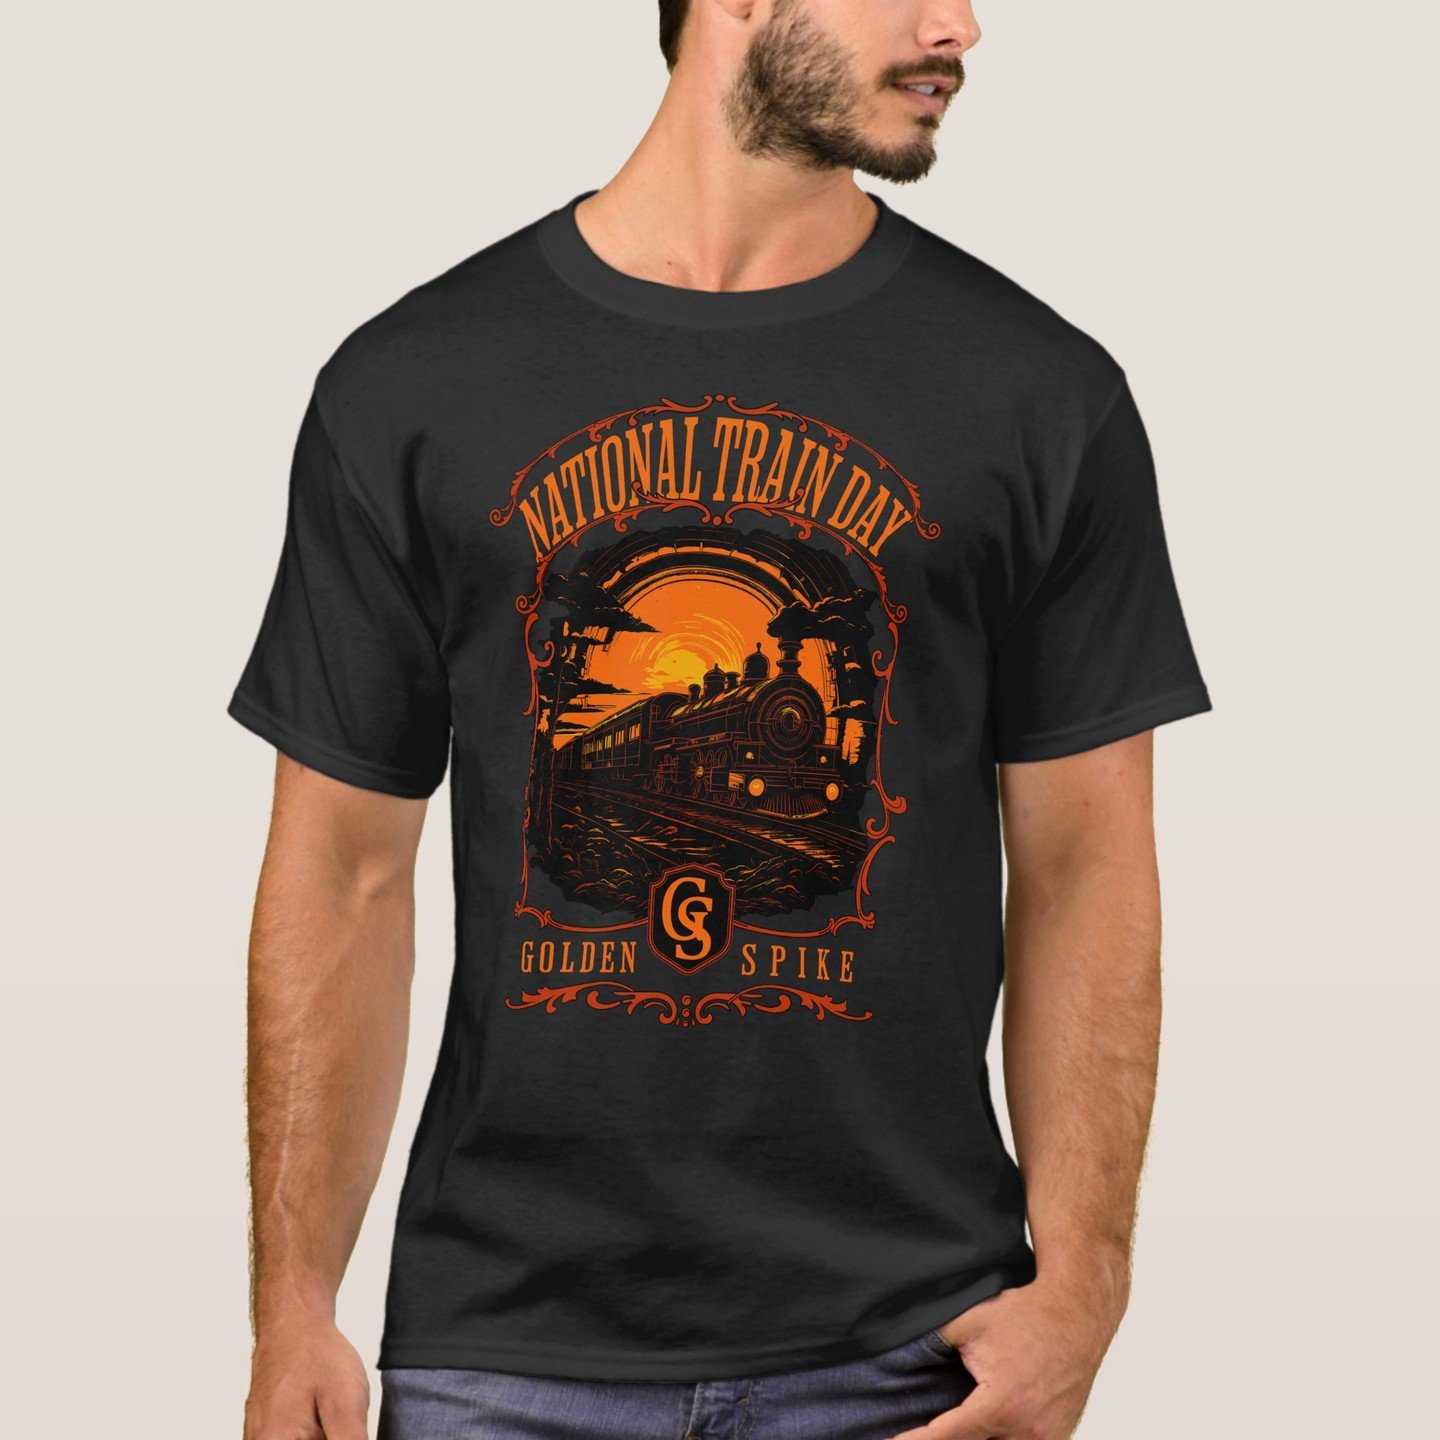 The Saturday closest to May 10th is National Train Day! The day commemorates the anniversary of the the &ldquo;last spike&rdquo; or the &ldquo;golden spike.&quot; Celebrate with this vintage design of a train at sunset. #linkinbio
.
#zazzle #redbubbl